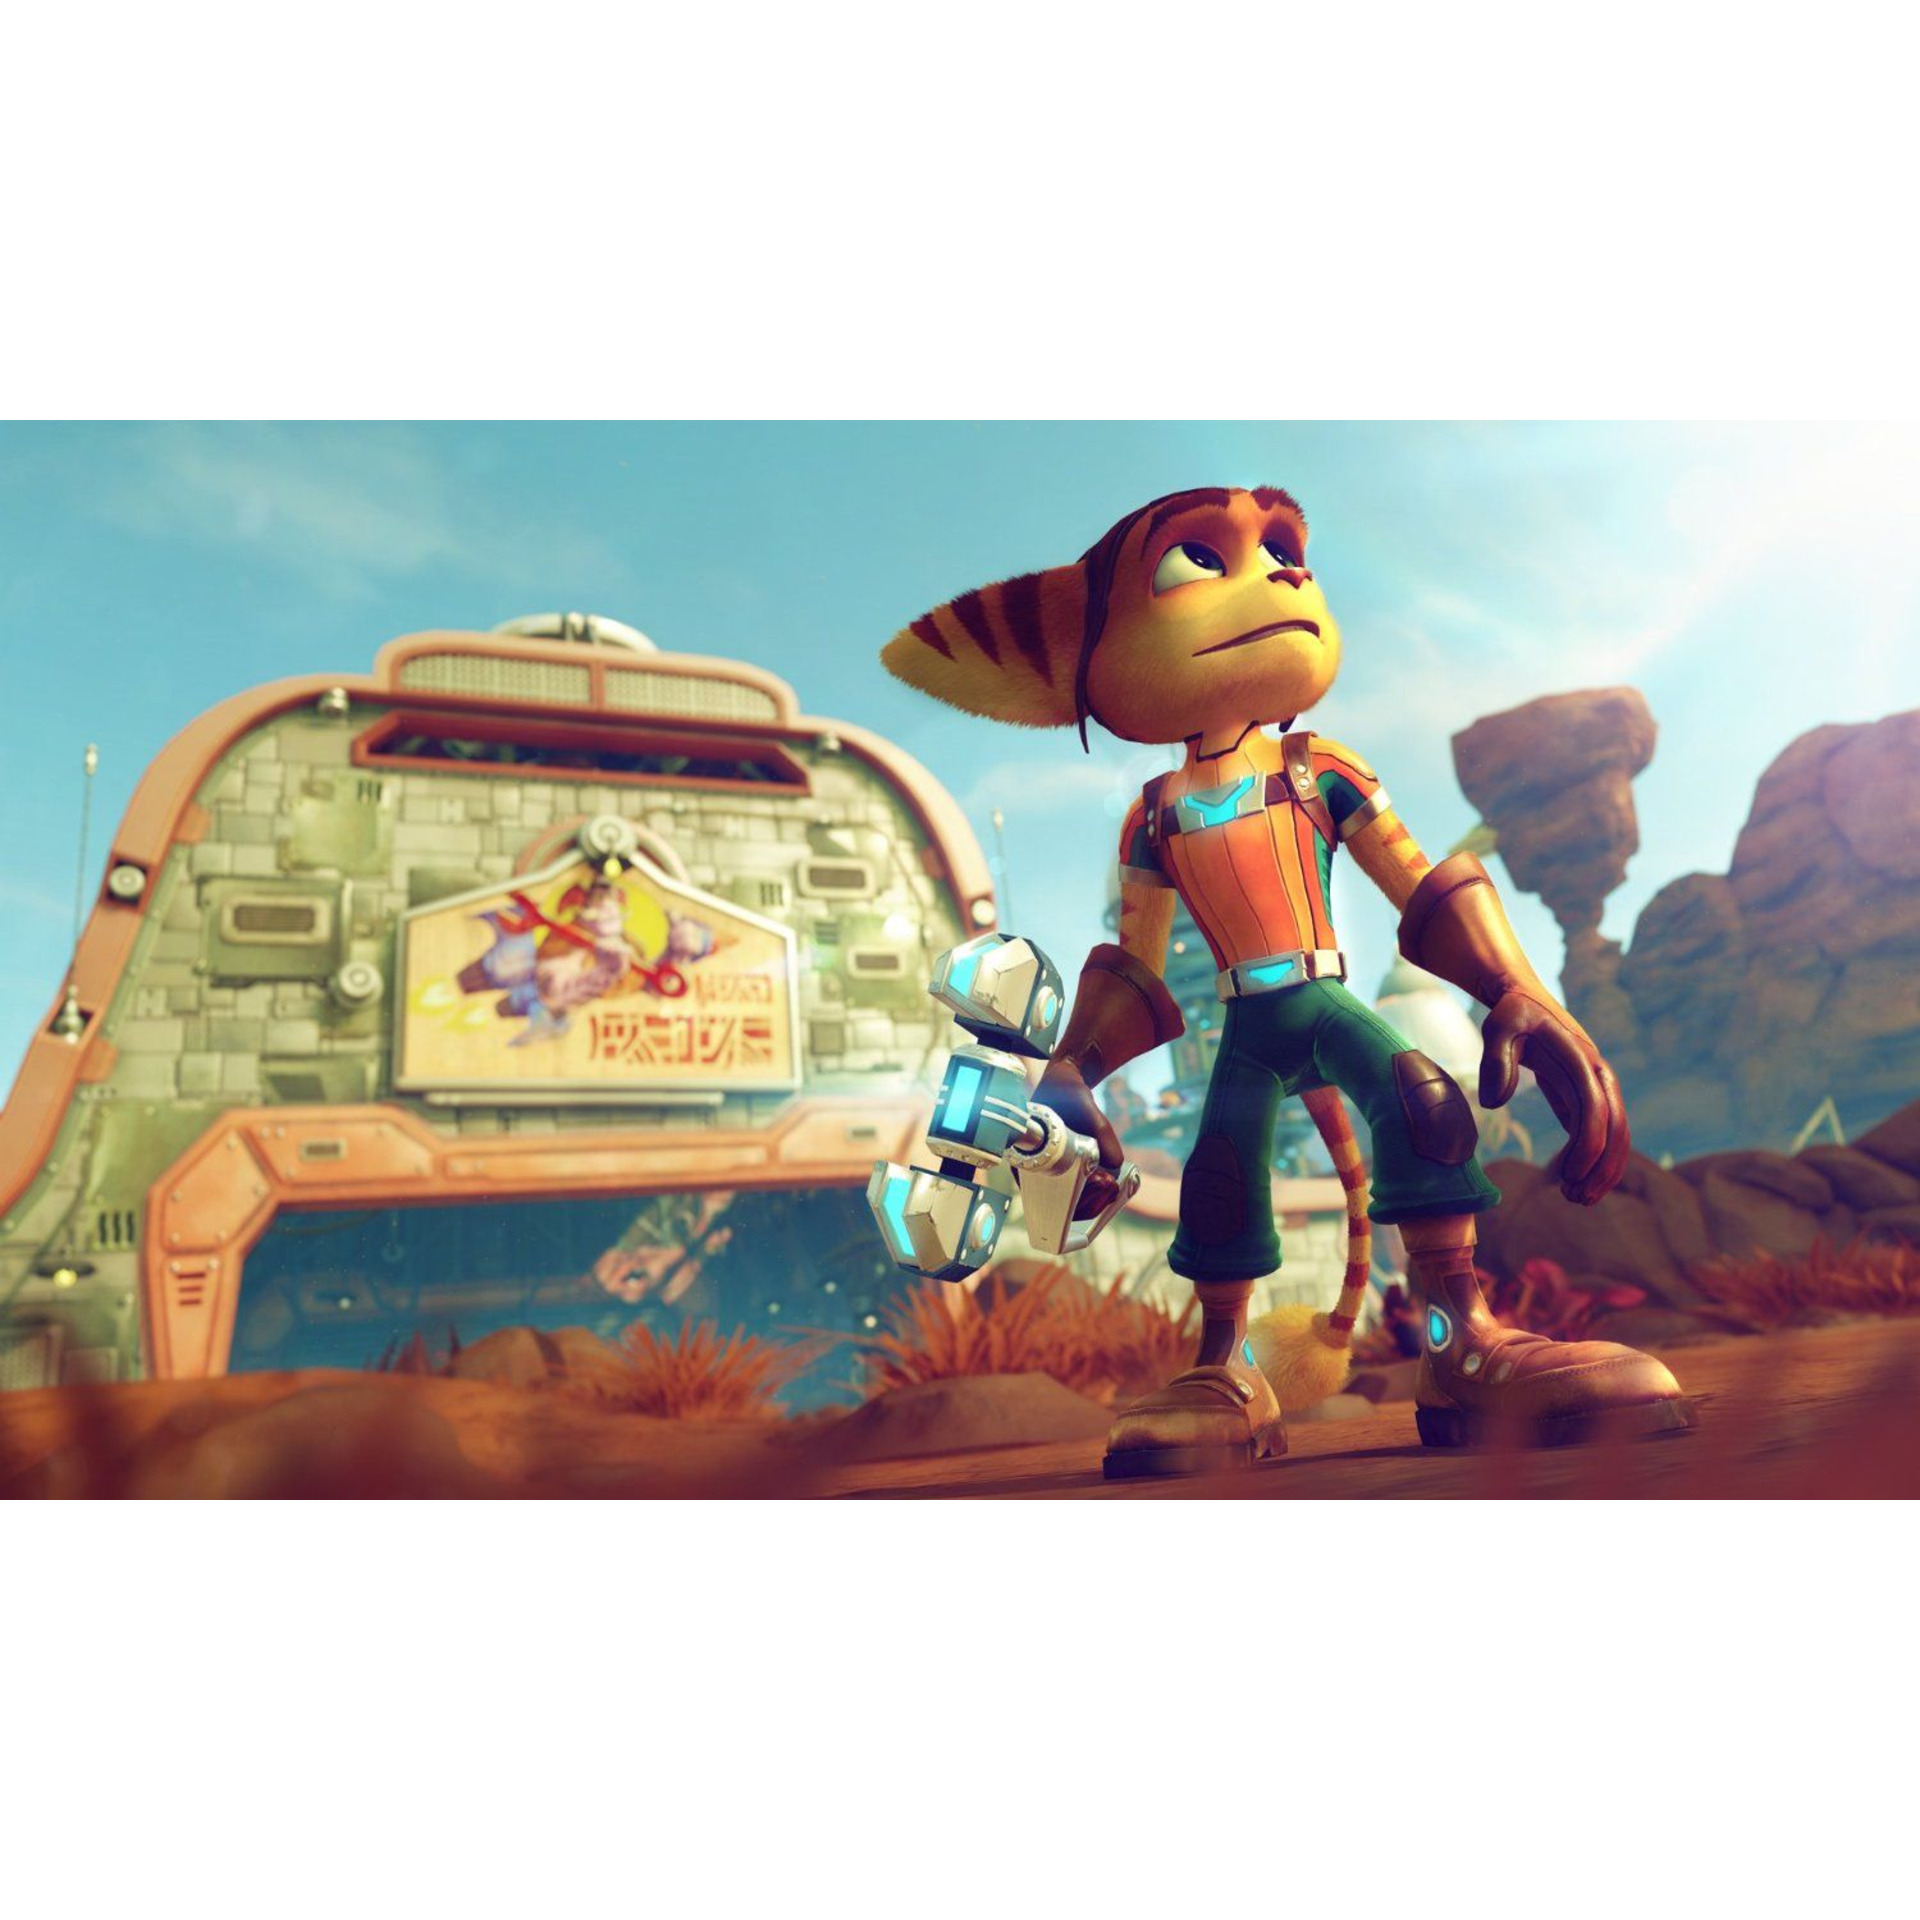 Игра PlayStation 4 Ratchet and Clank /HITS/